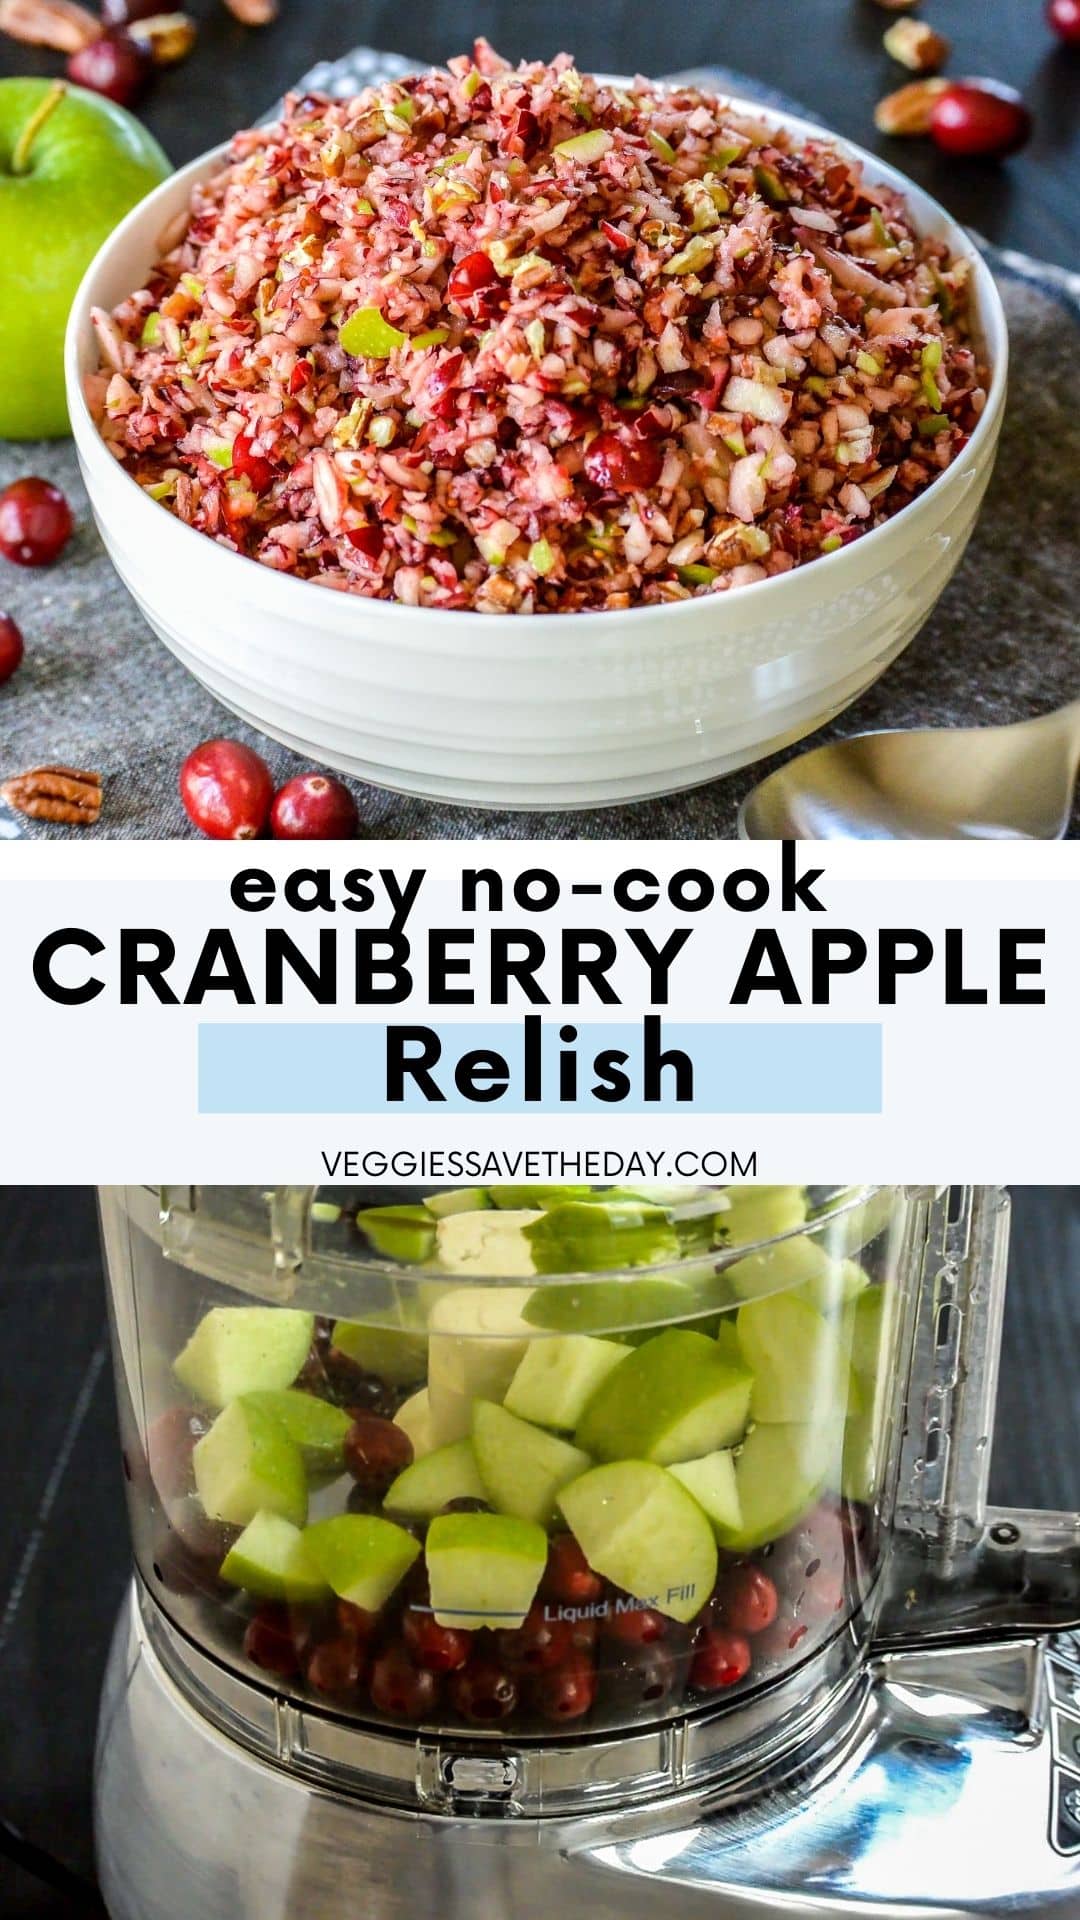 Bowl of relish in top image; cranberries and chunks of green apple in a food processor in the bottom image.